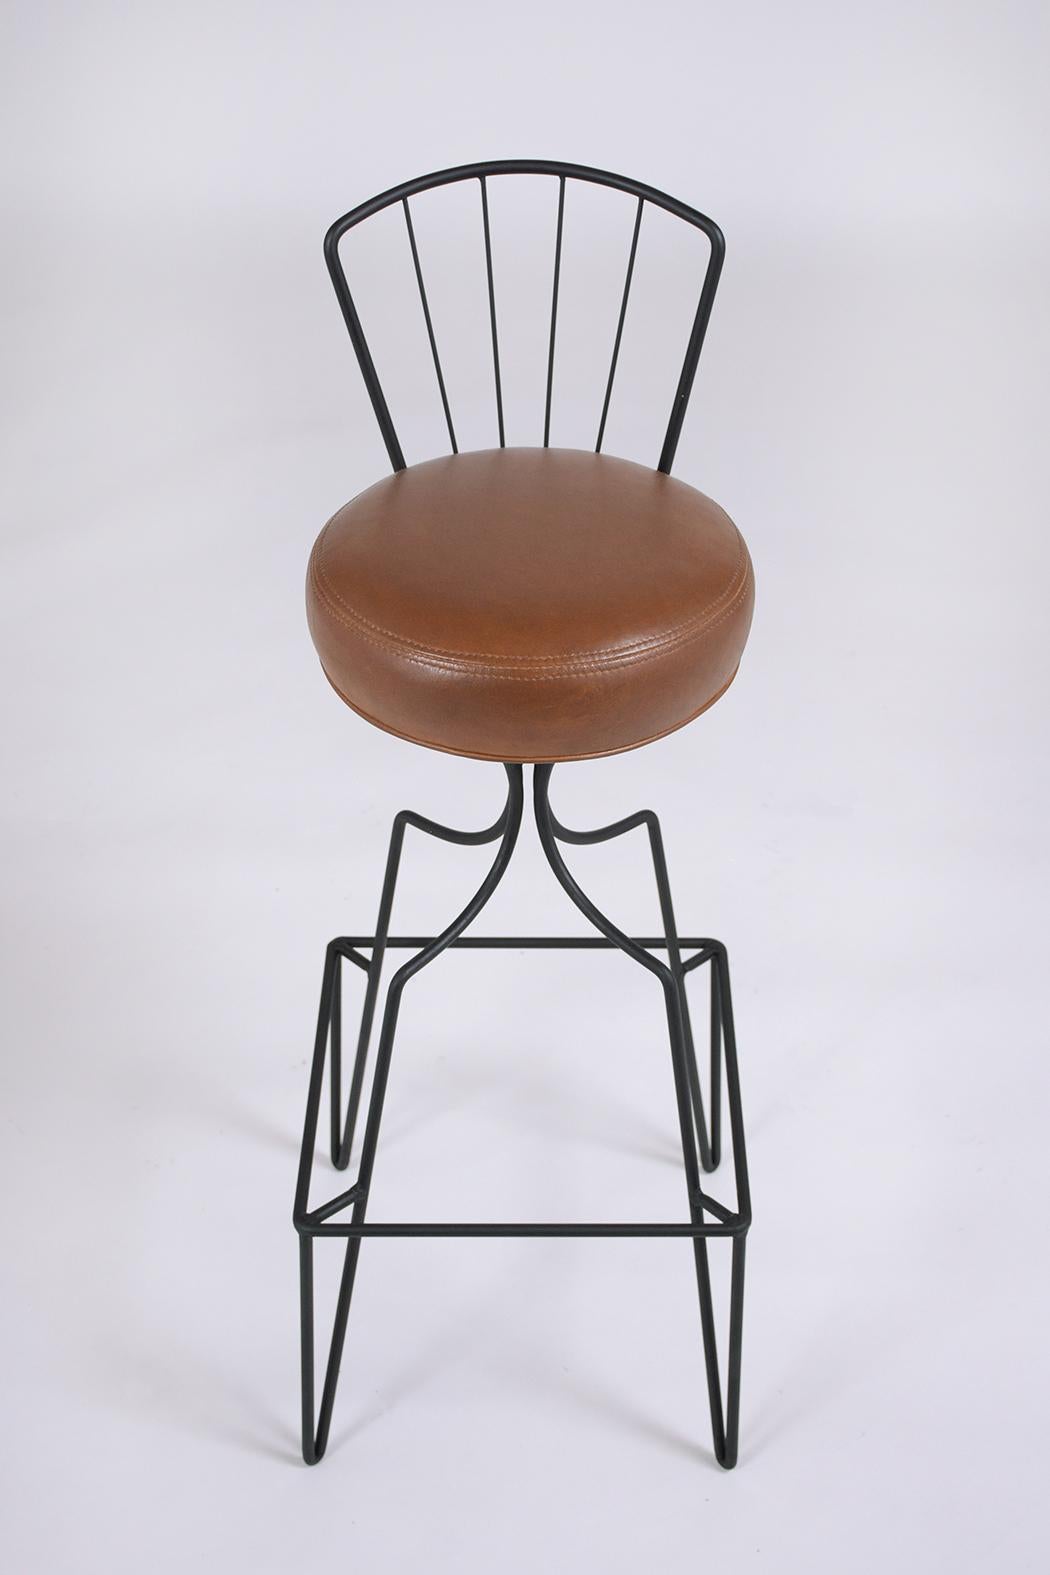 1960s Mid-Century Modern Restored Swivel Leather Bar Stools In Good Condition For Sale In Los Angeles, CA